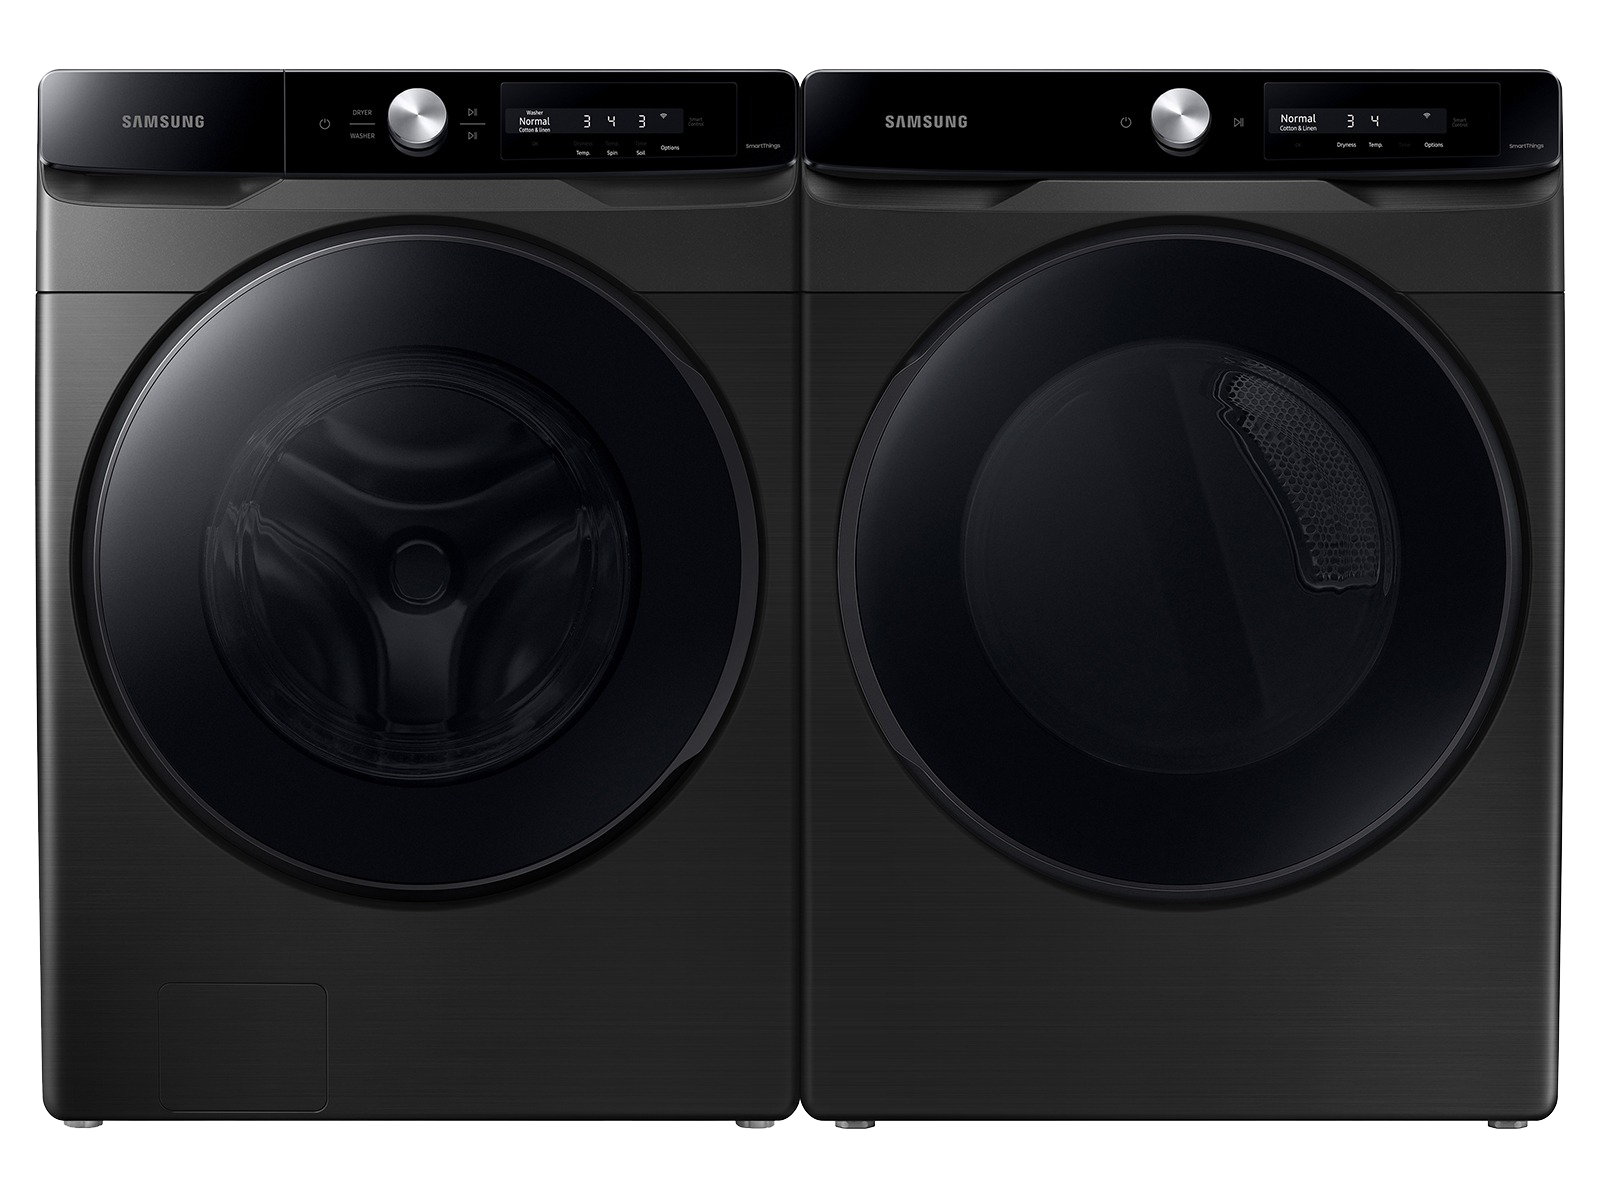 Photos - Tumble Dryer Samsung Smart Dial Front Load Super Speed Wash Washer and Smart Dial Super 